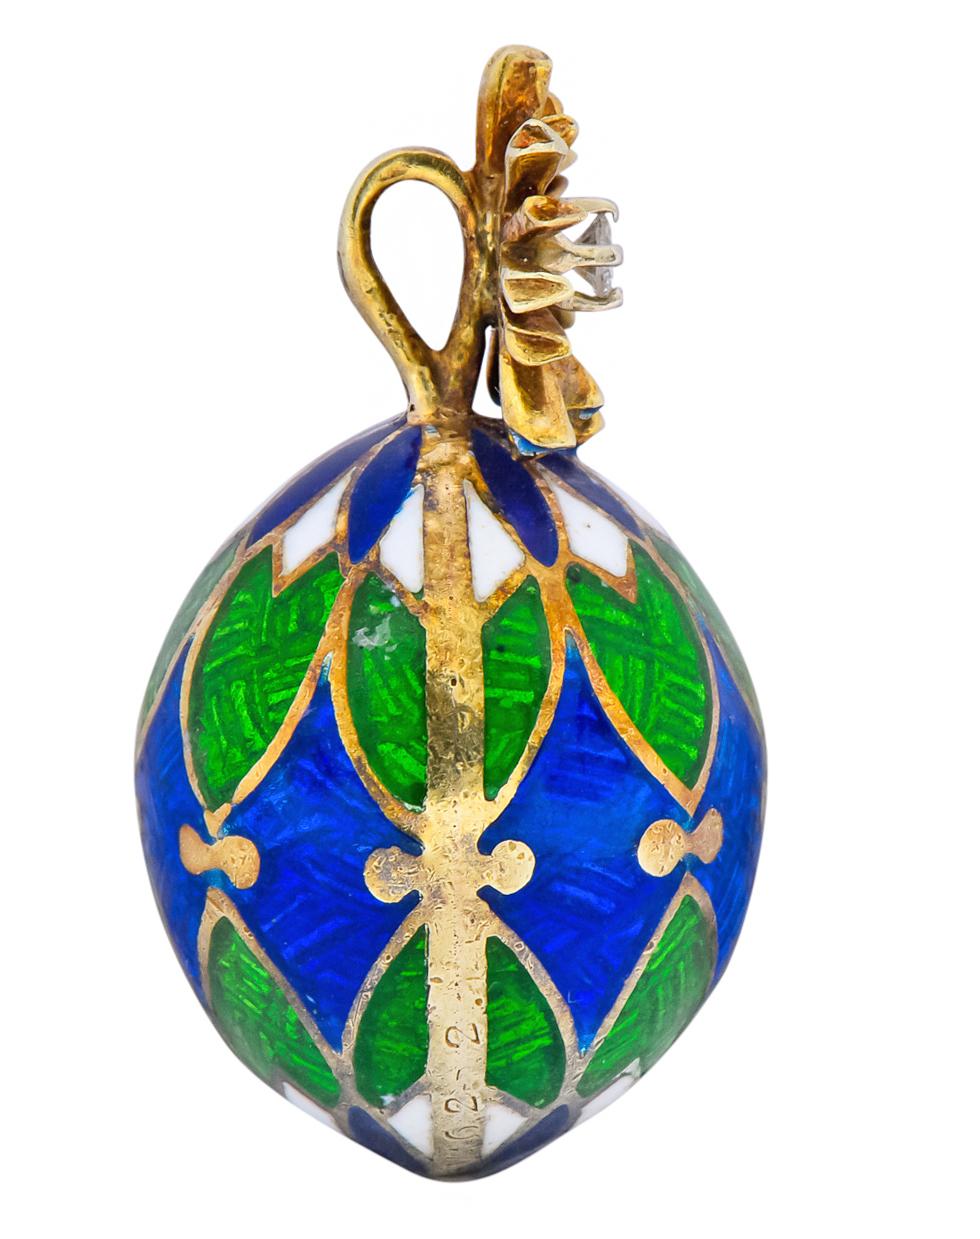 Pendant designed as an egg with pleasing pattern of blue, green, and white enamel

Topped by a radiating starburst motif centering a round brilliant cut diamond weighing approximately .03 carat, H color and VS clarity

Completed by concealed